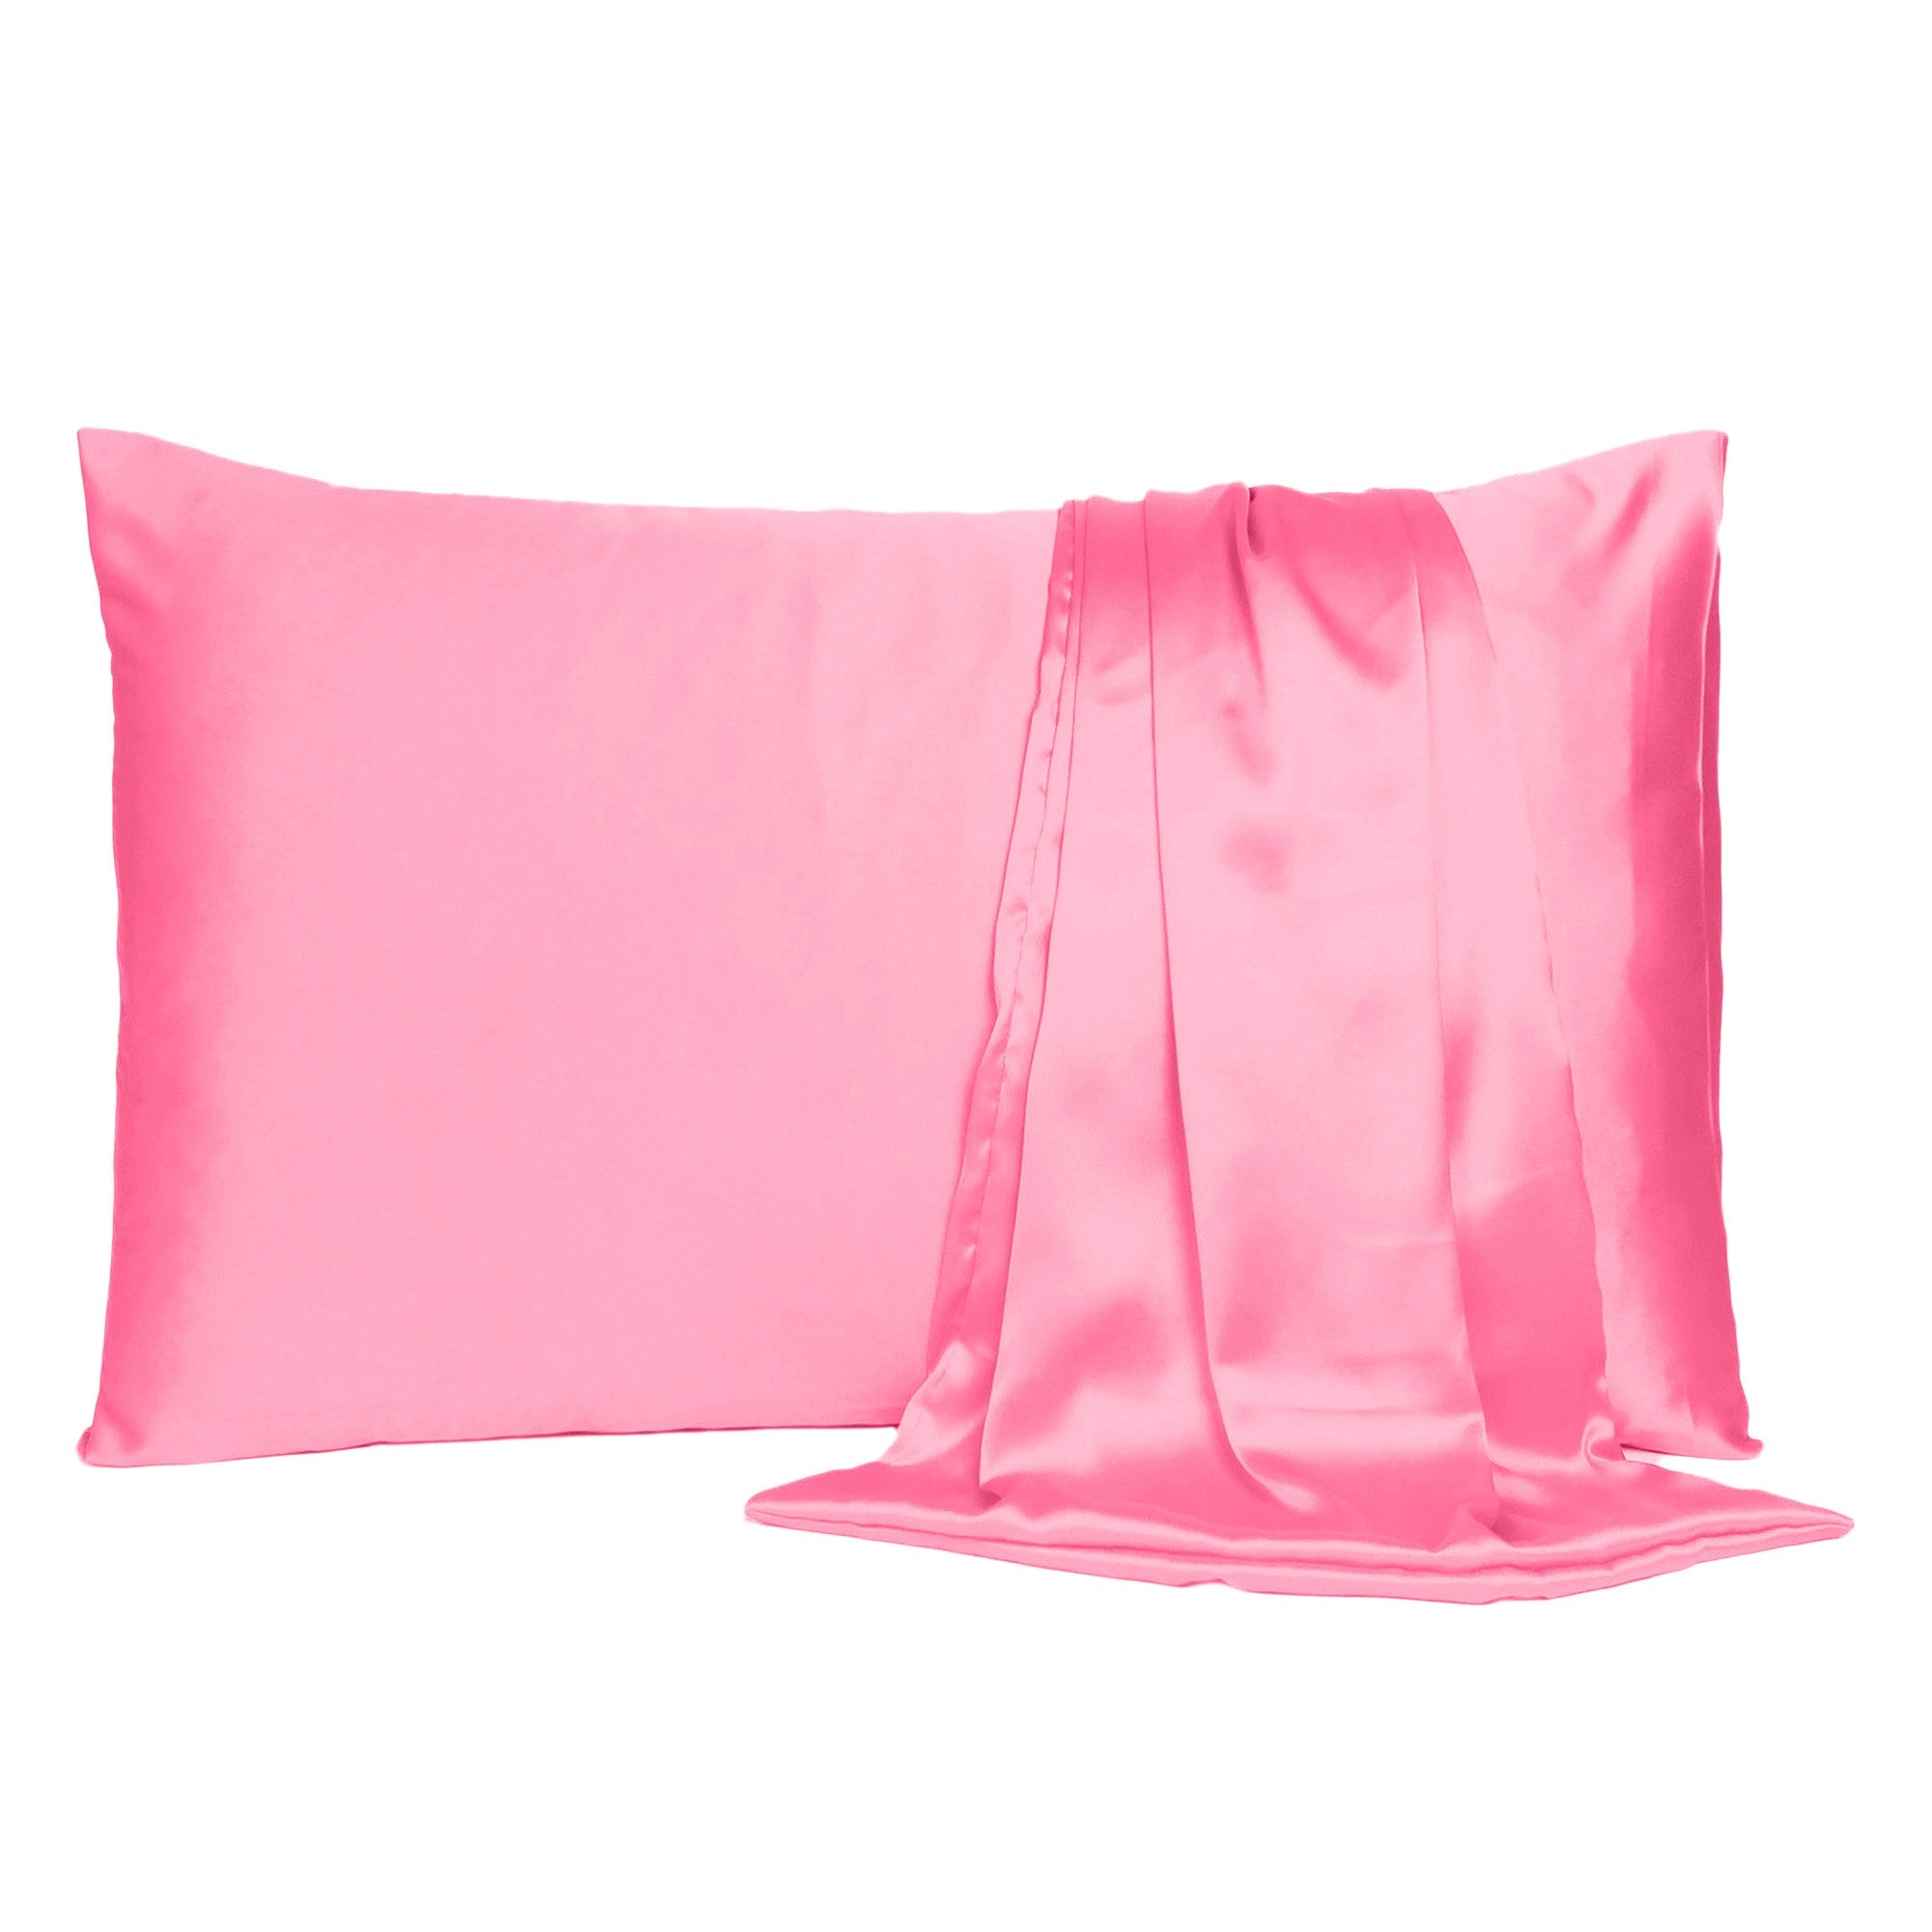 Pink Rose Dreamy Set Of 2 Silky Satin Queen Pillowcases